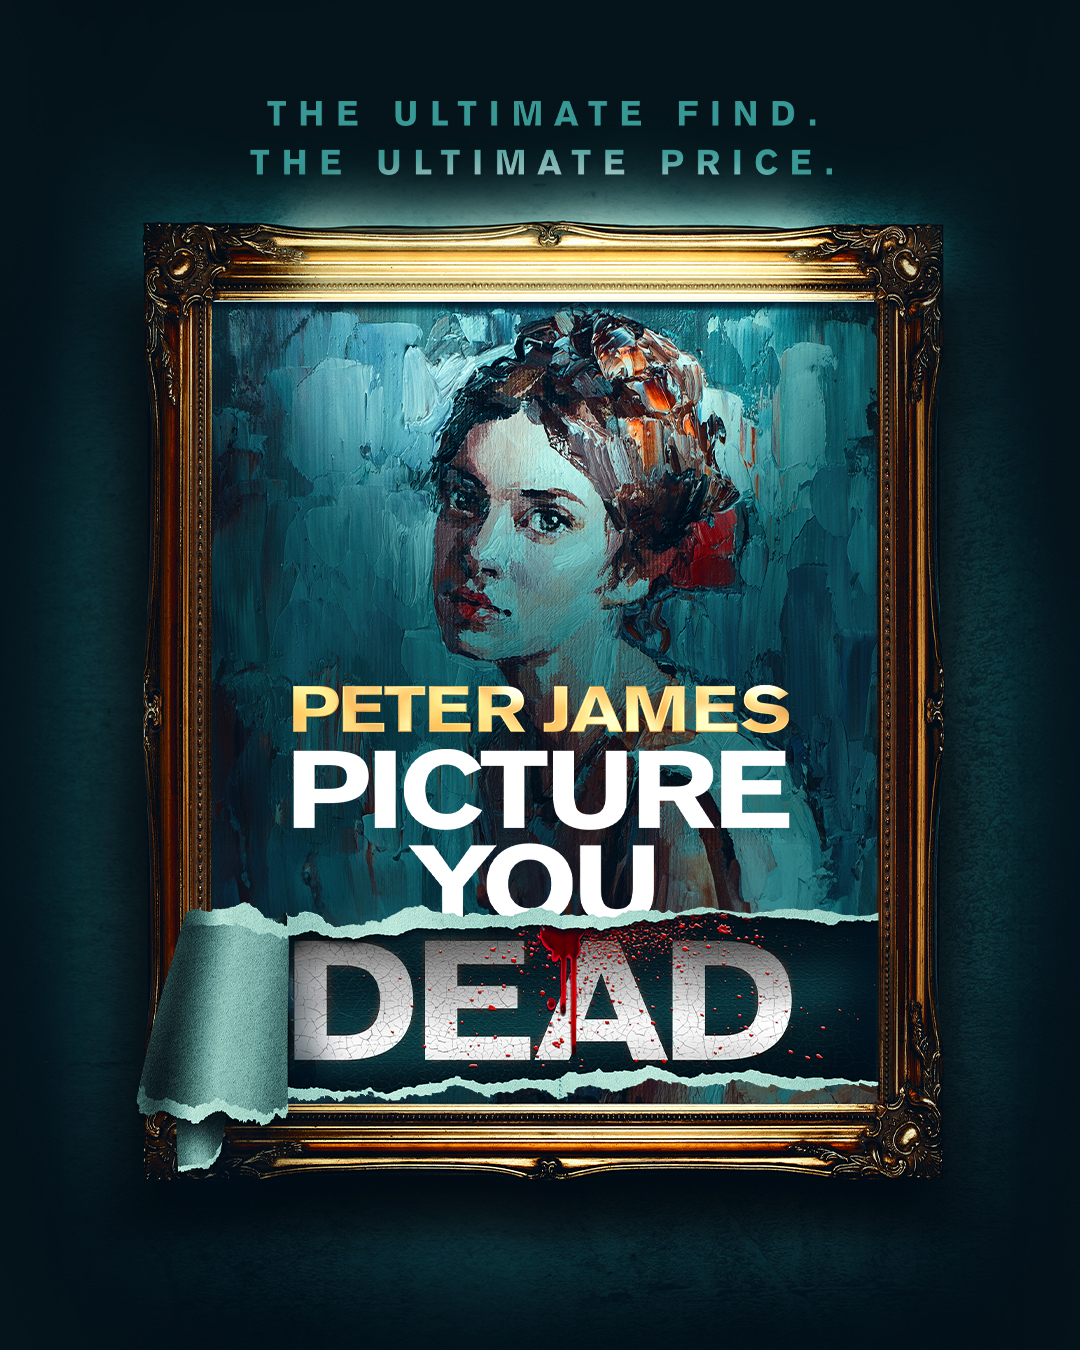 PETER JAMES’ PICTURE YOU DEAD